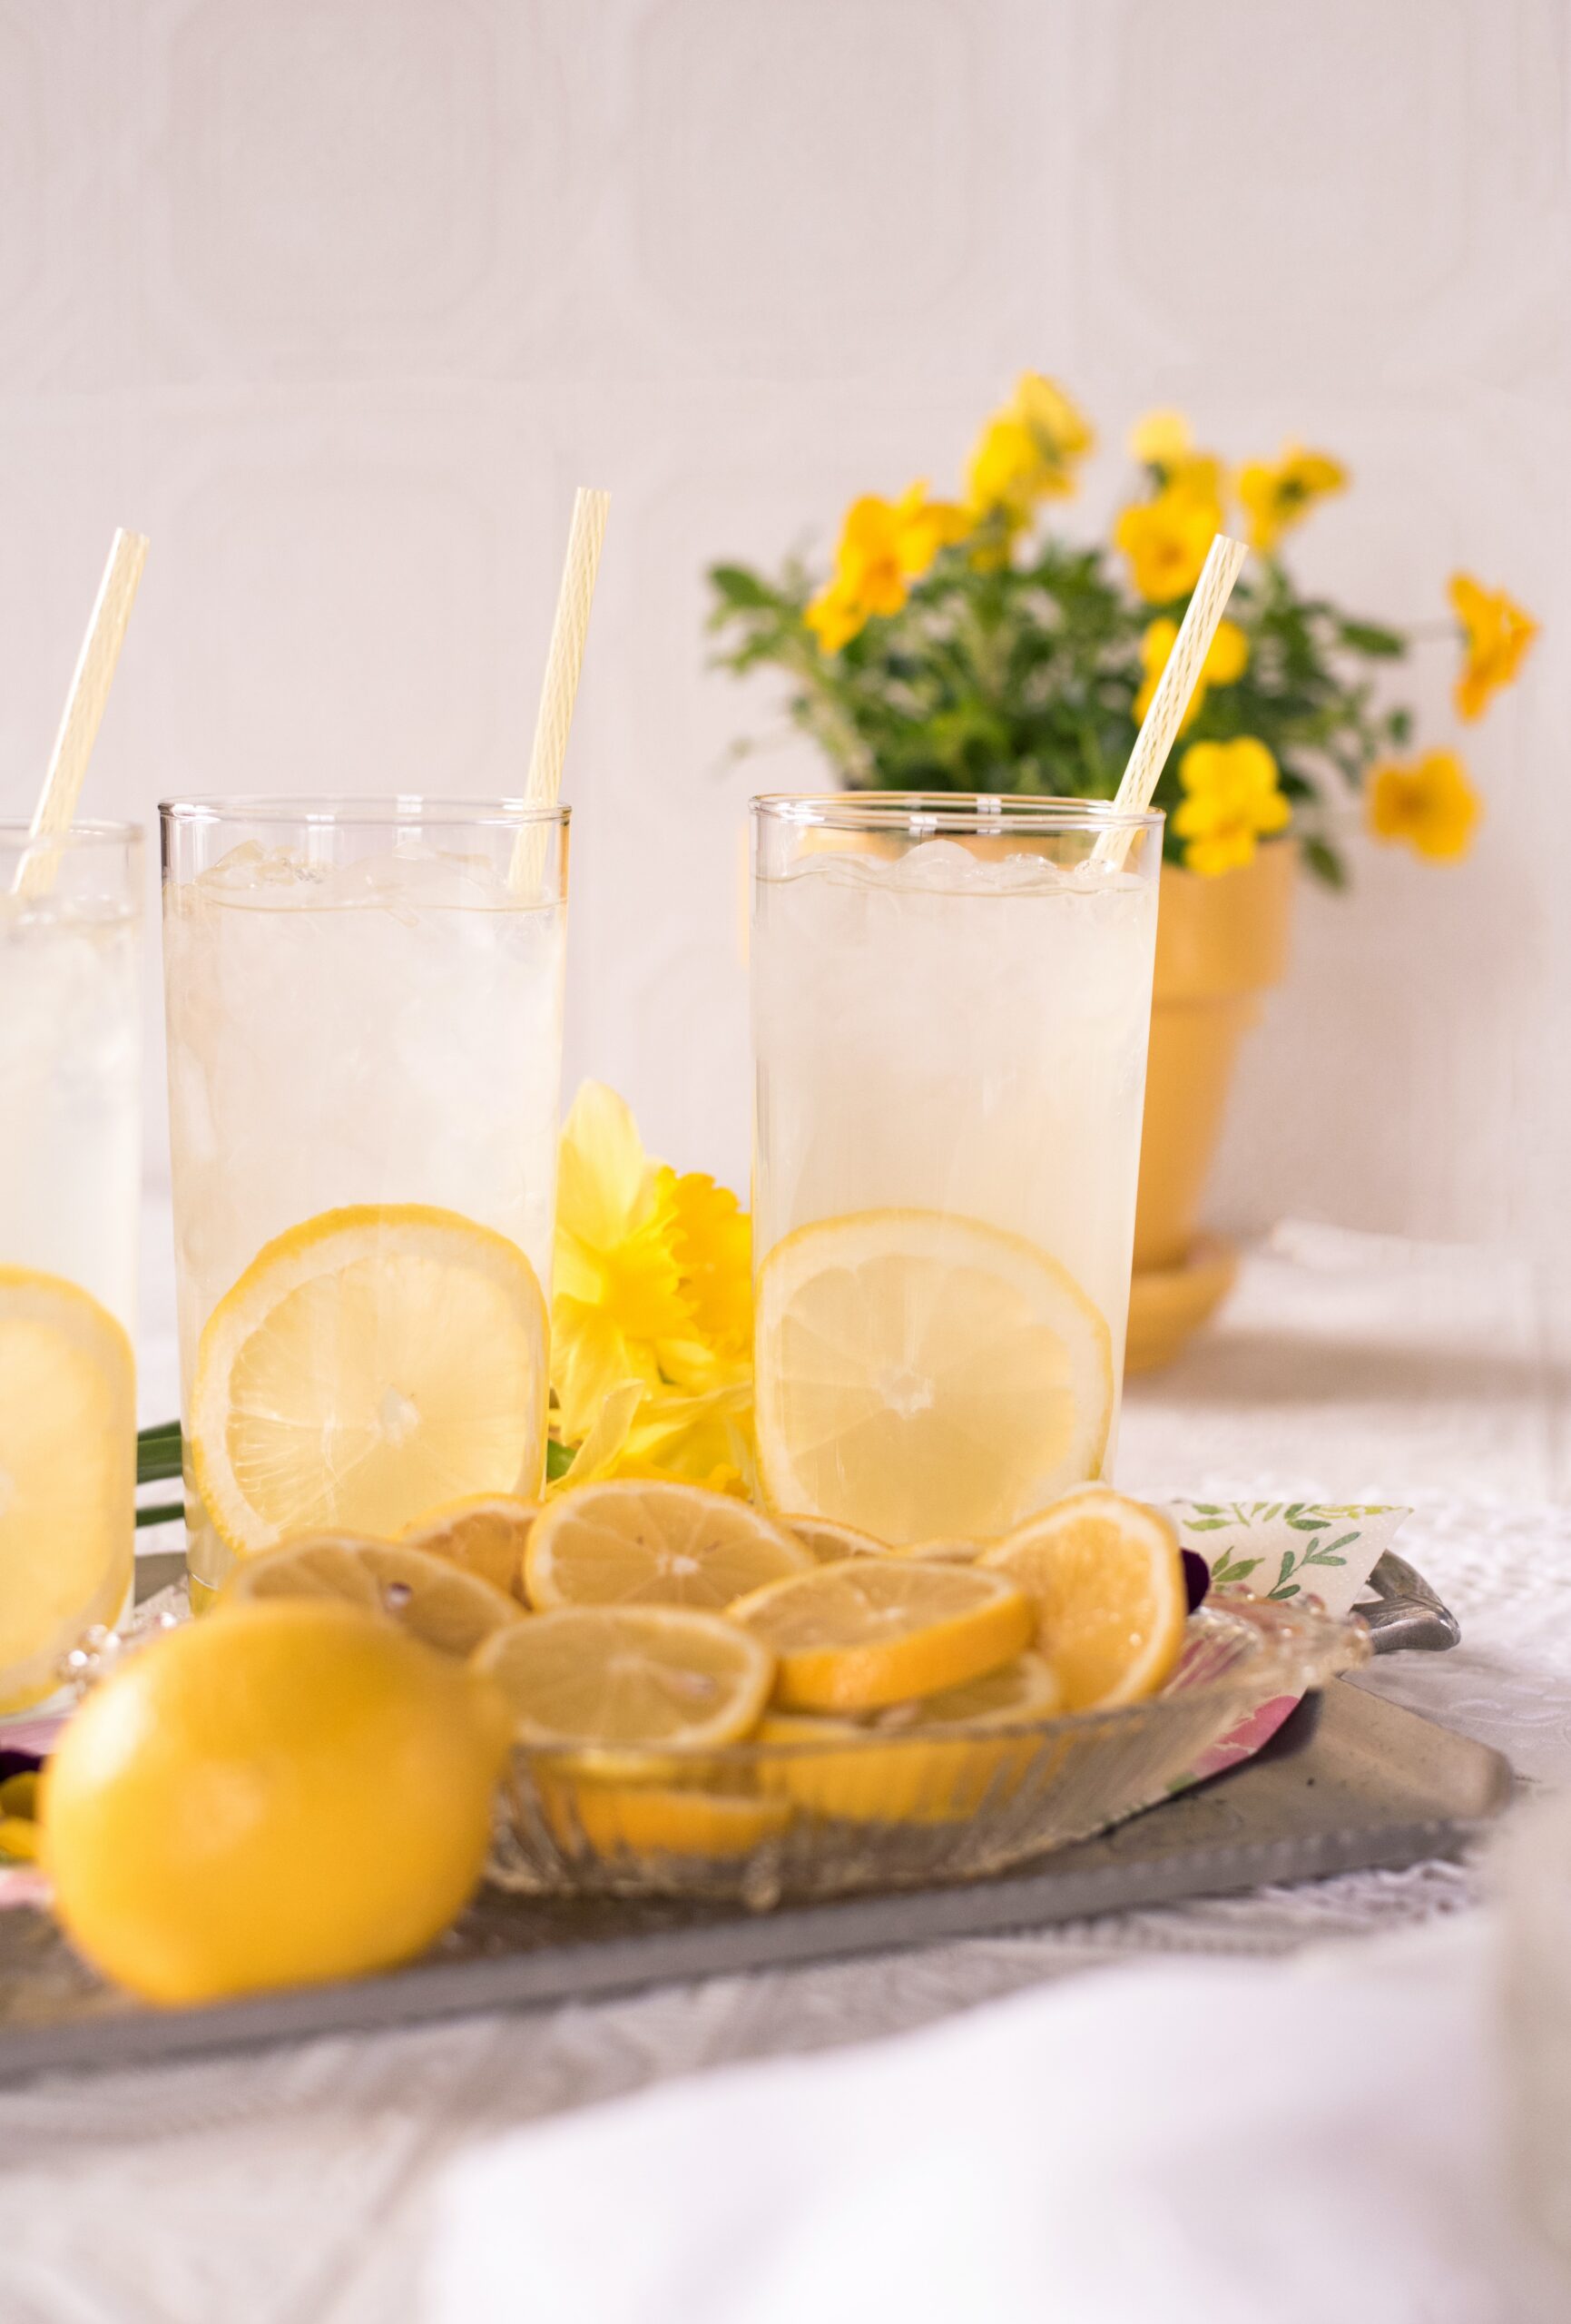 Sip and Sizzle: Why Masala Lemonade Is the Ultimate Summer Thirst Quencher!